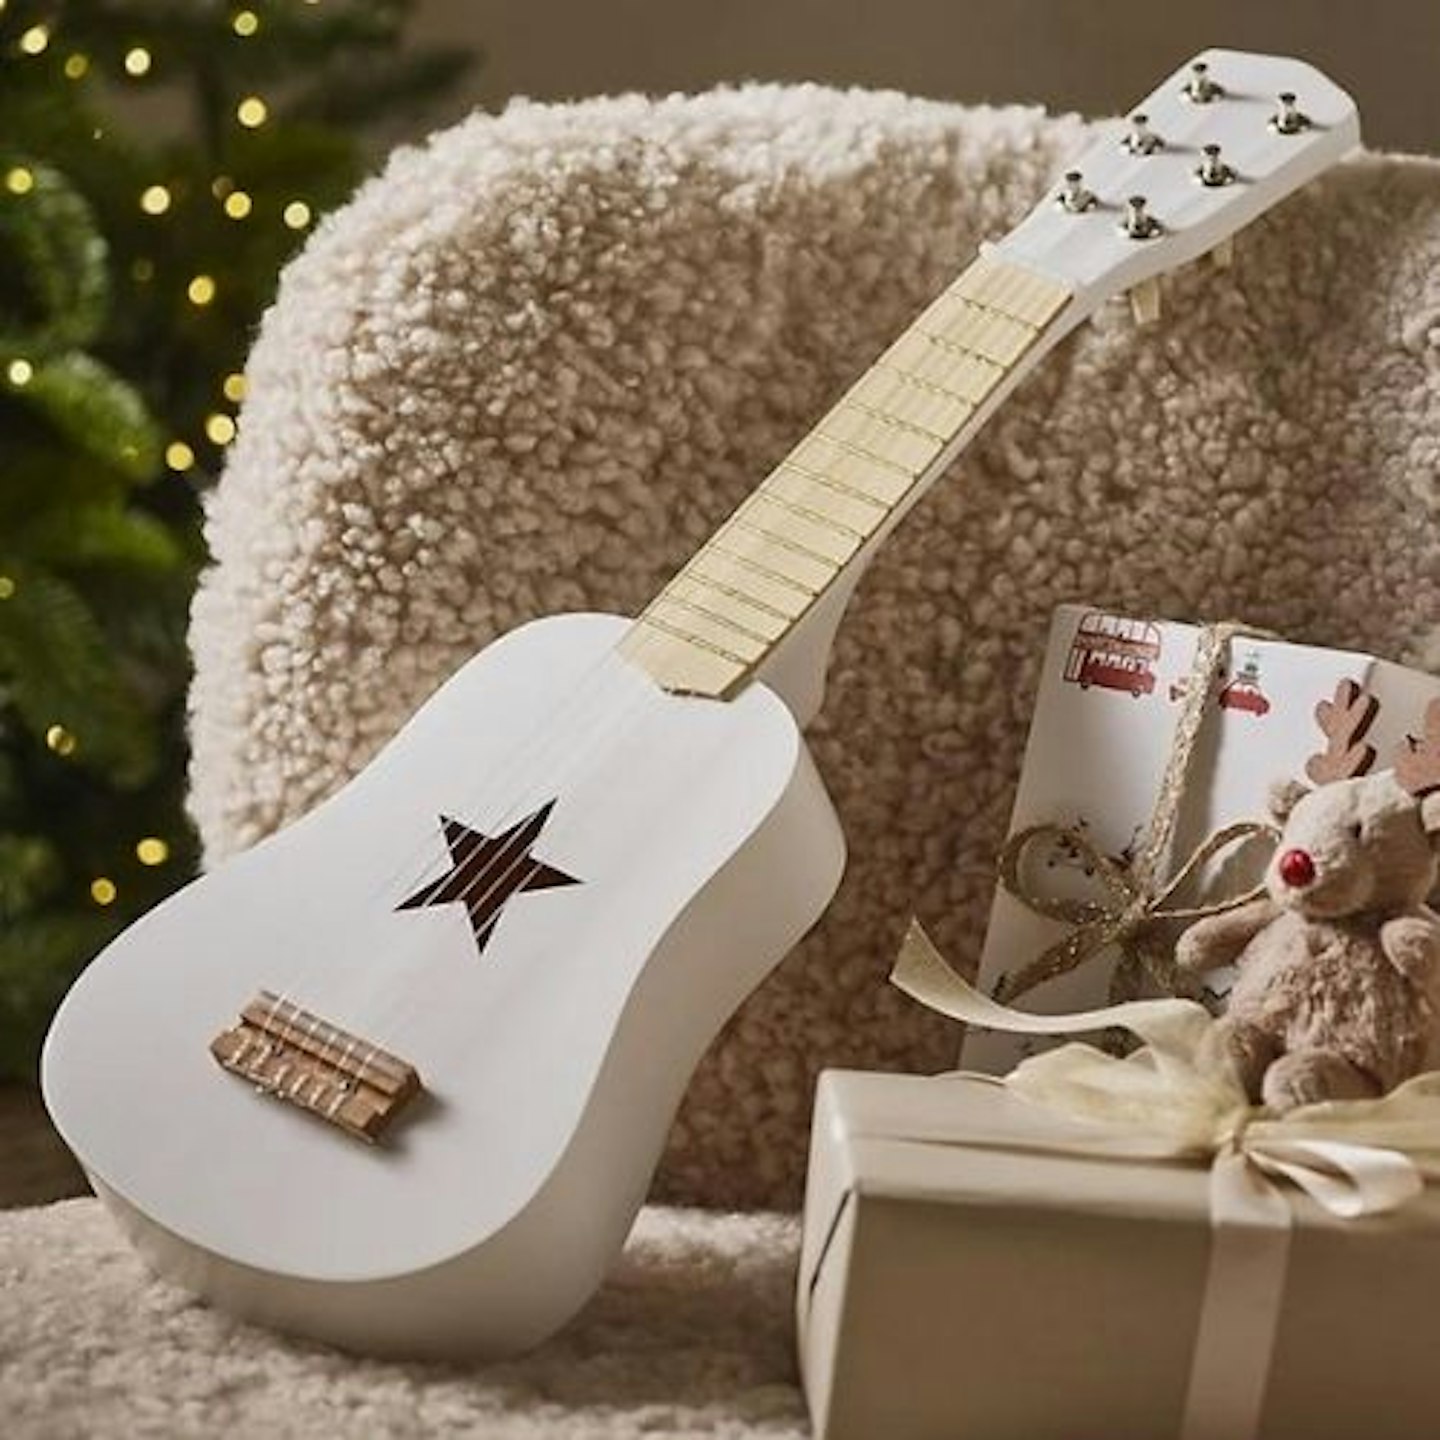 Top Christmas Toys: Kid’s Concept Wooden Guitar